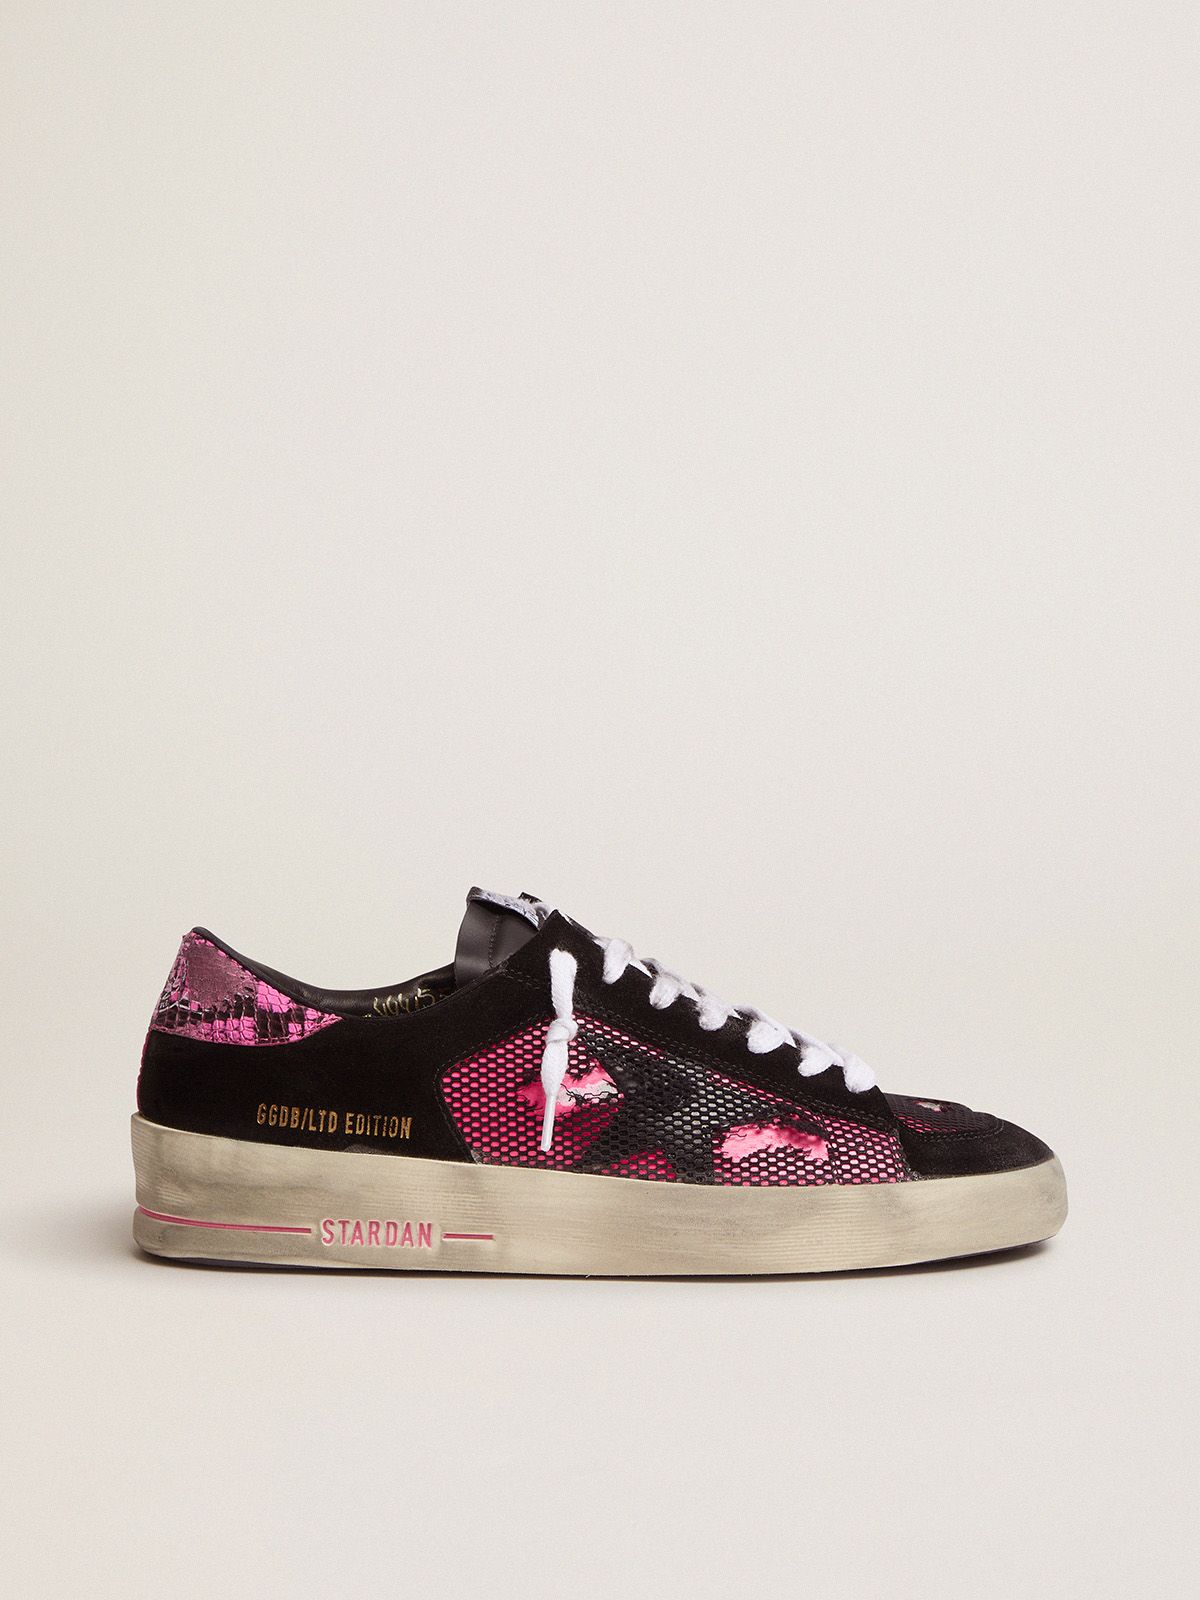 Fuchsia and black Limited Edition LAB Stardan sneakers